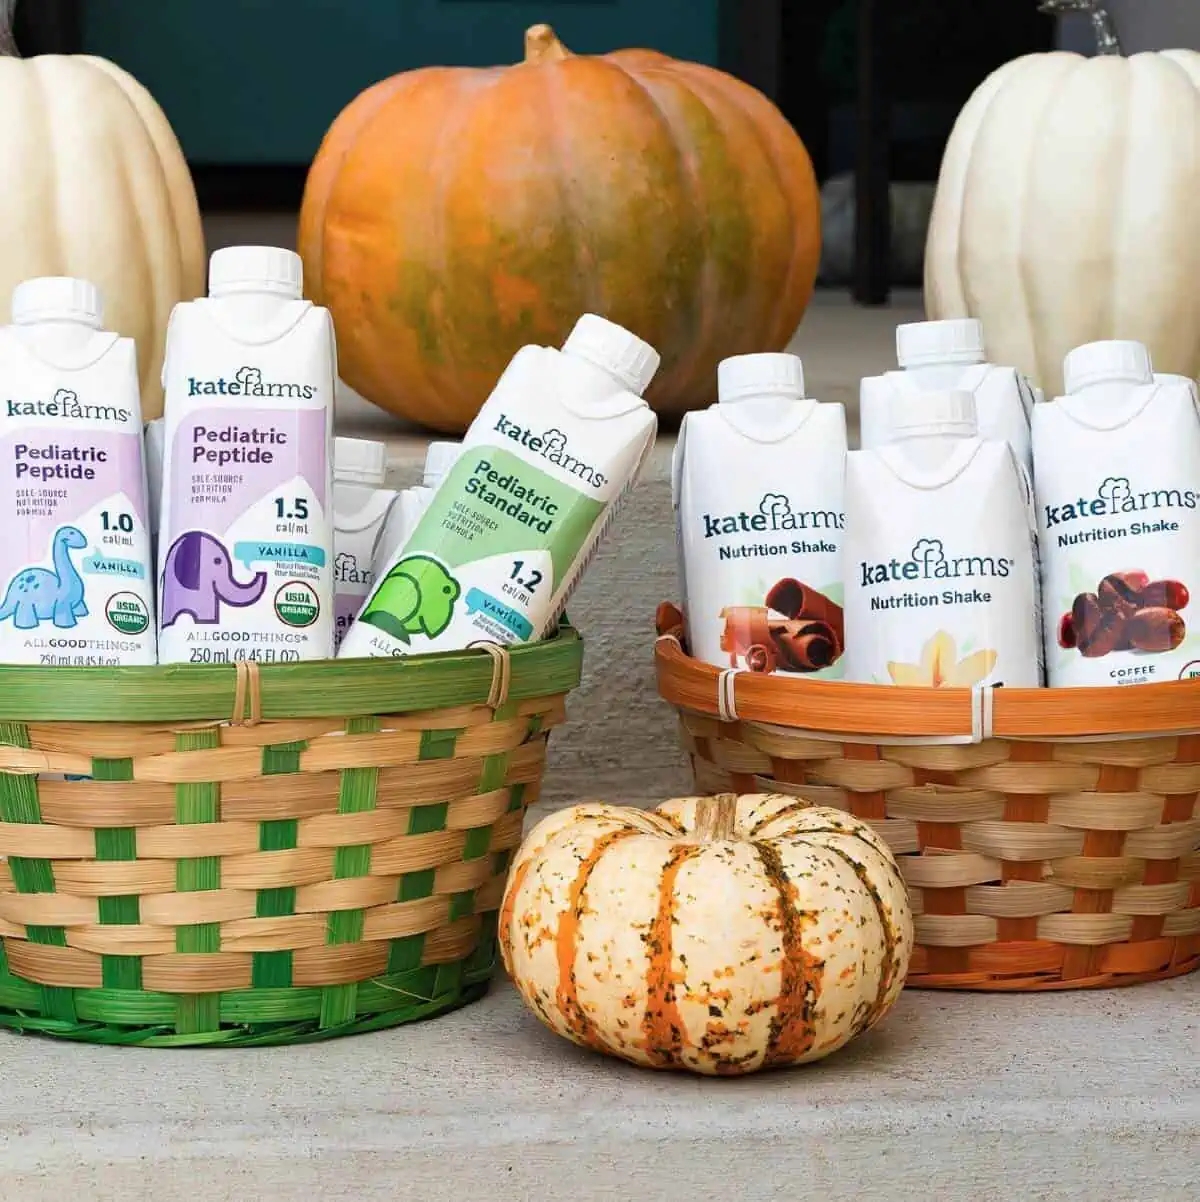 Two baskets holding Kate Farms plant-based Pediatric Peptide and Nutrition Shakes in different flavors surrounded by autumn pumpkins.